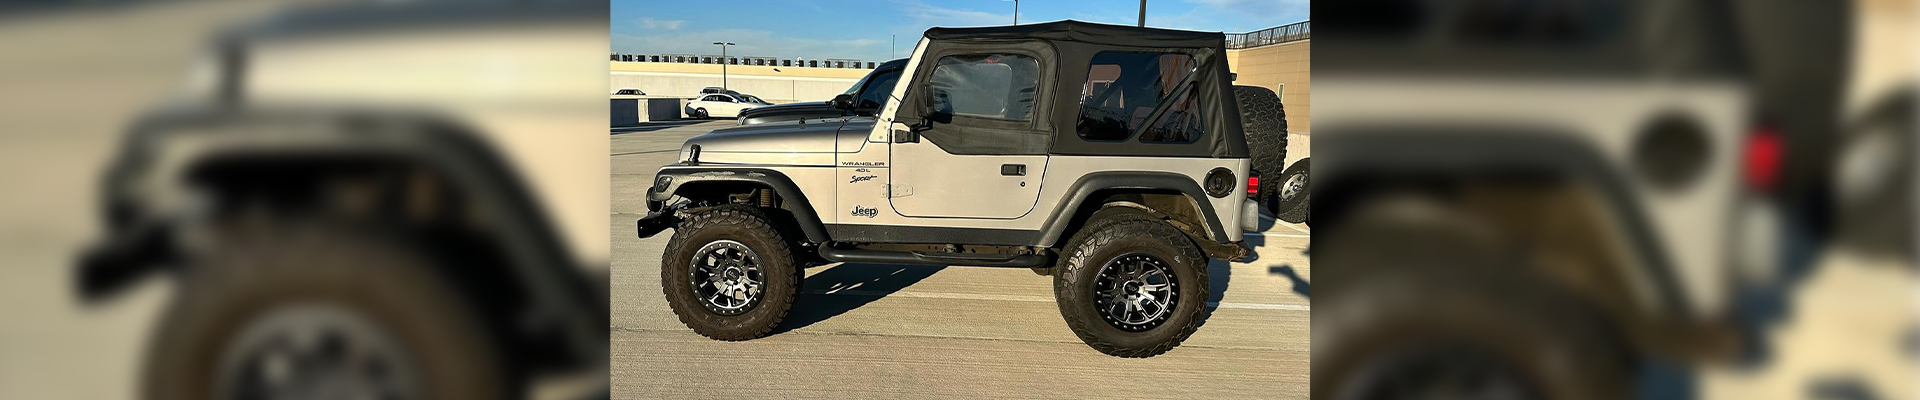 jeep-Wrangler-TJ-gallery-image.png